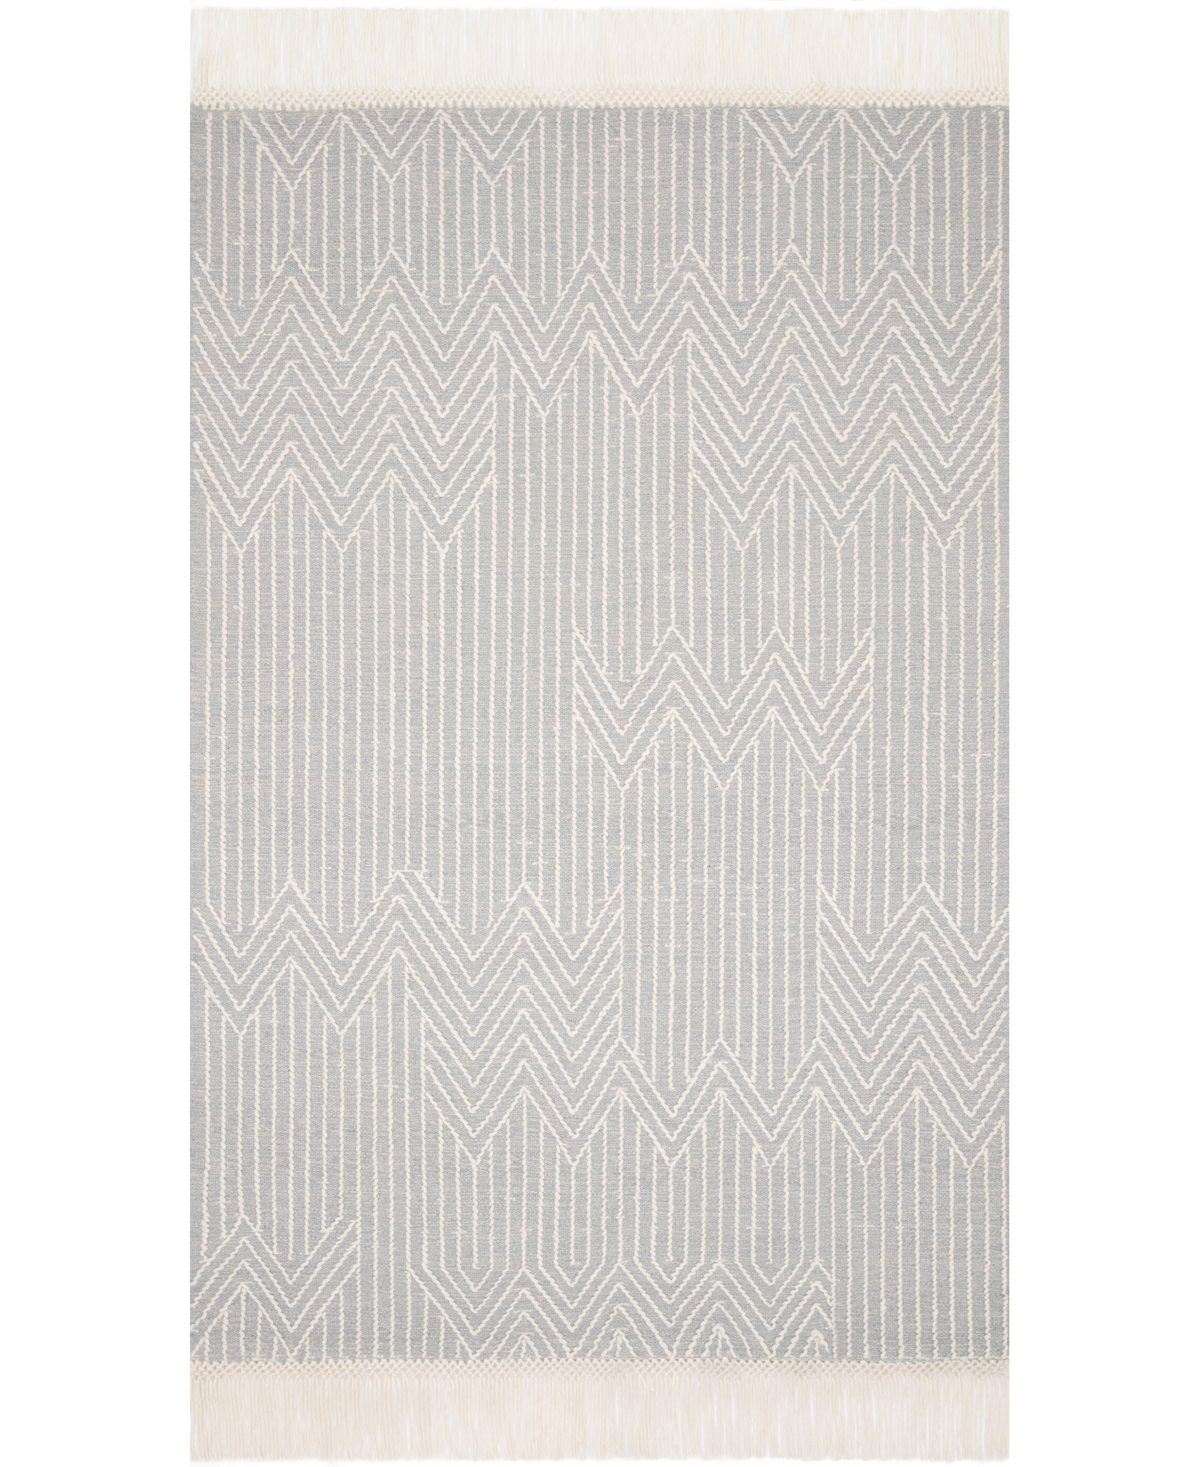 Magnolia Home By Joanna Gaines X Loloi Newton Net-02 5' X 7'6" Area Rug In Silver